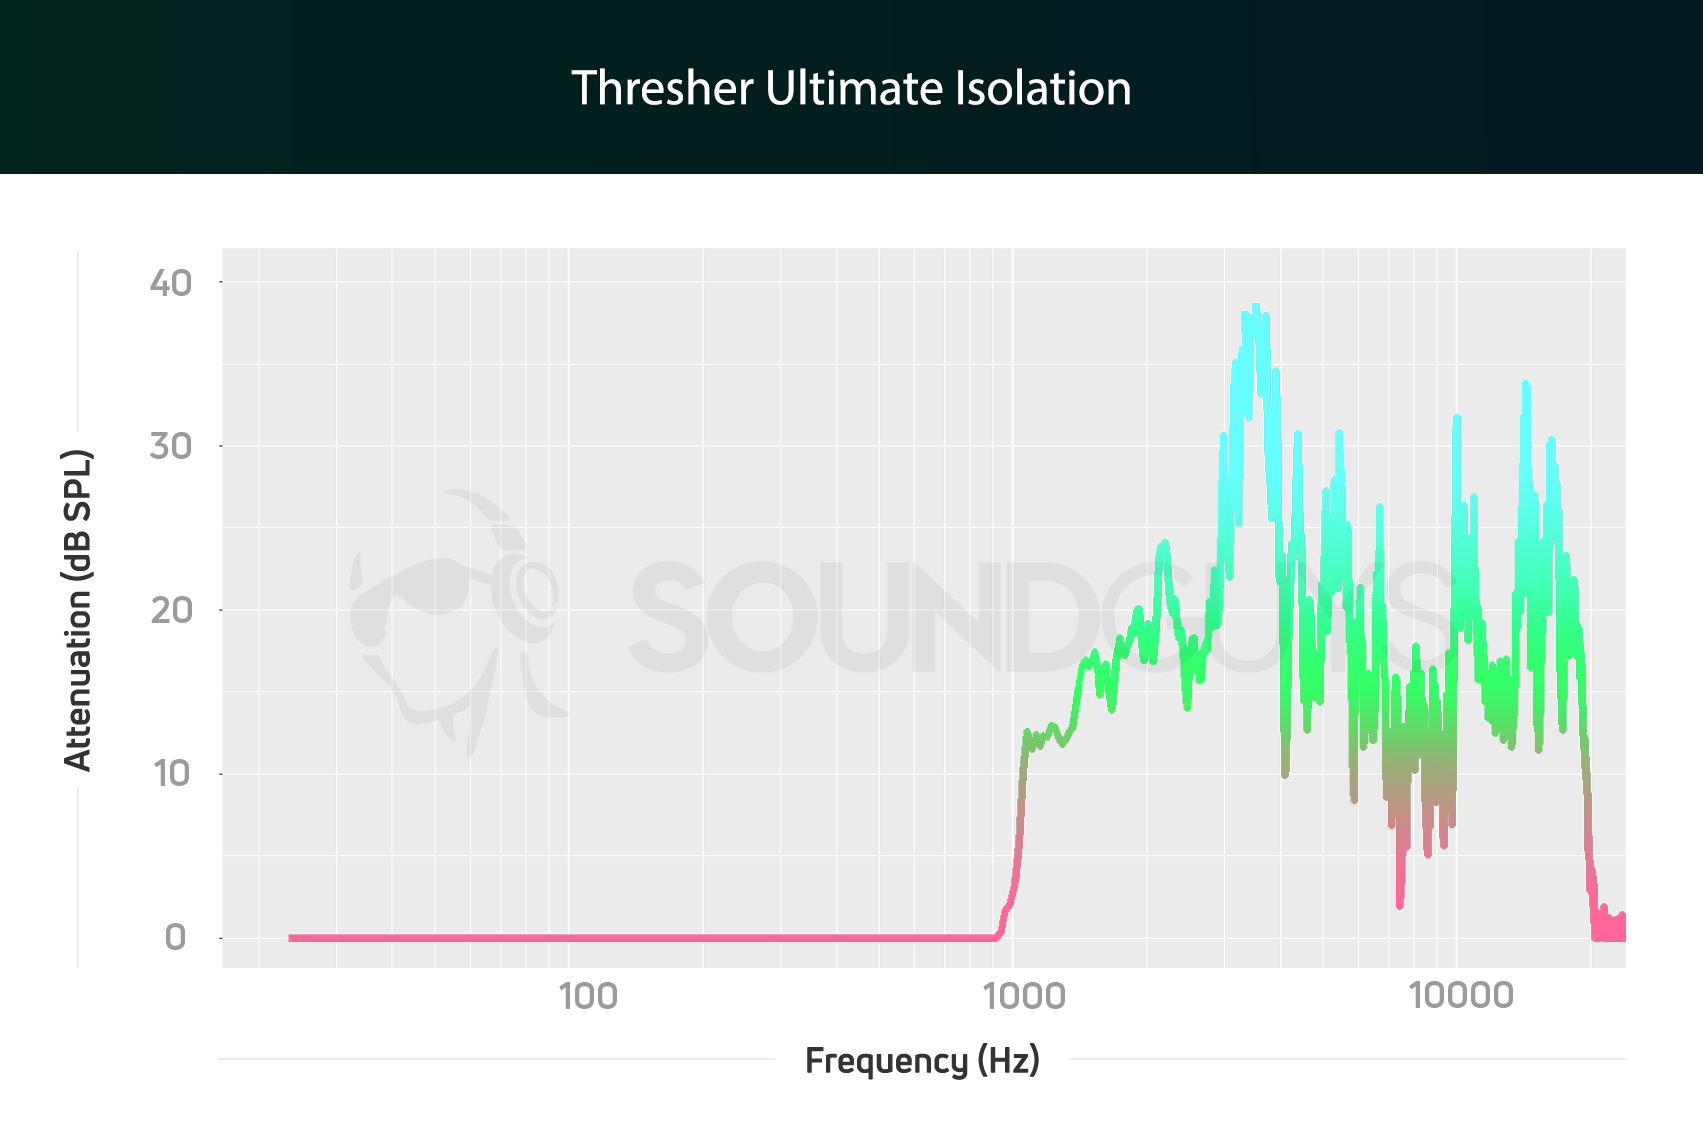 An isolation chart for the Razer Thresher Ultimate gaming headset, which shows fairly average isolation for a gaming headset